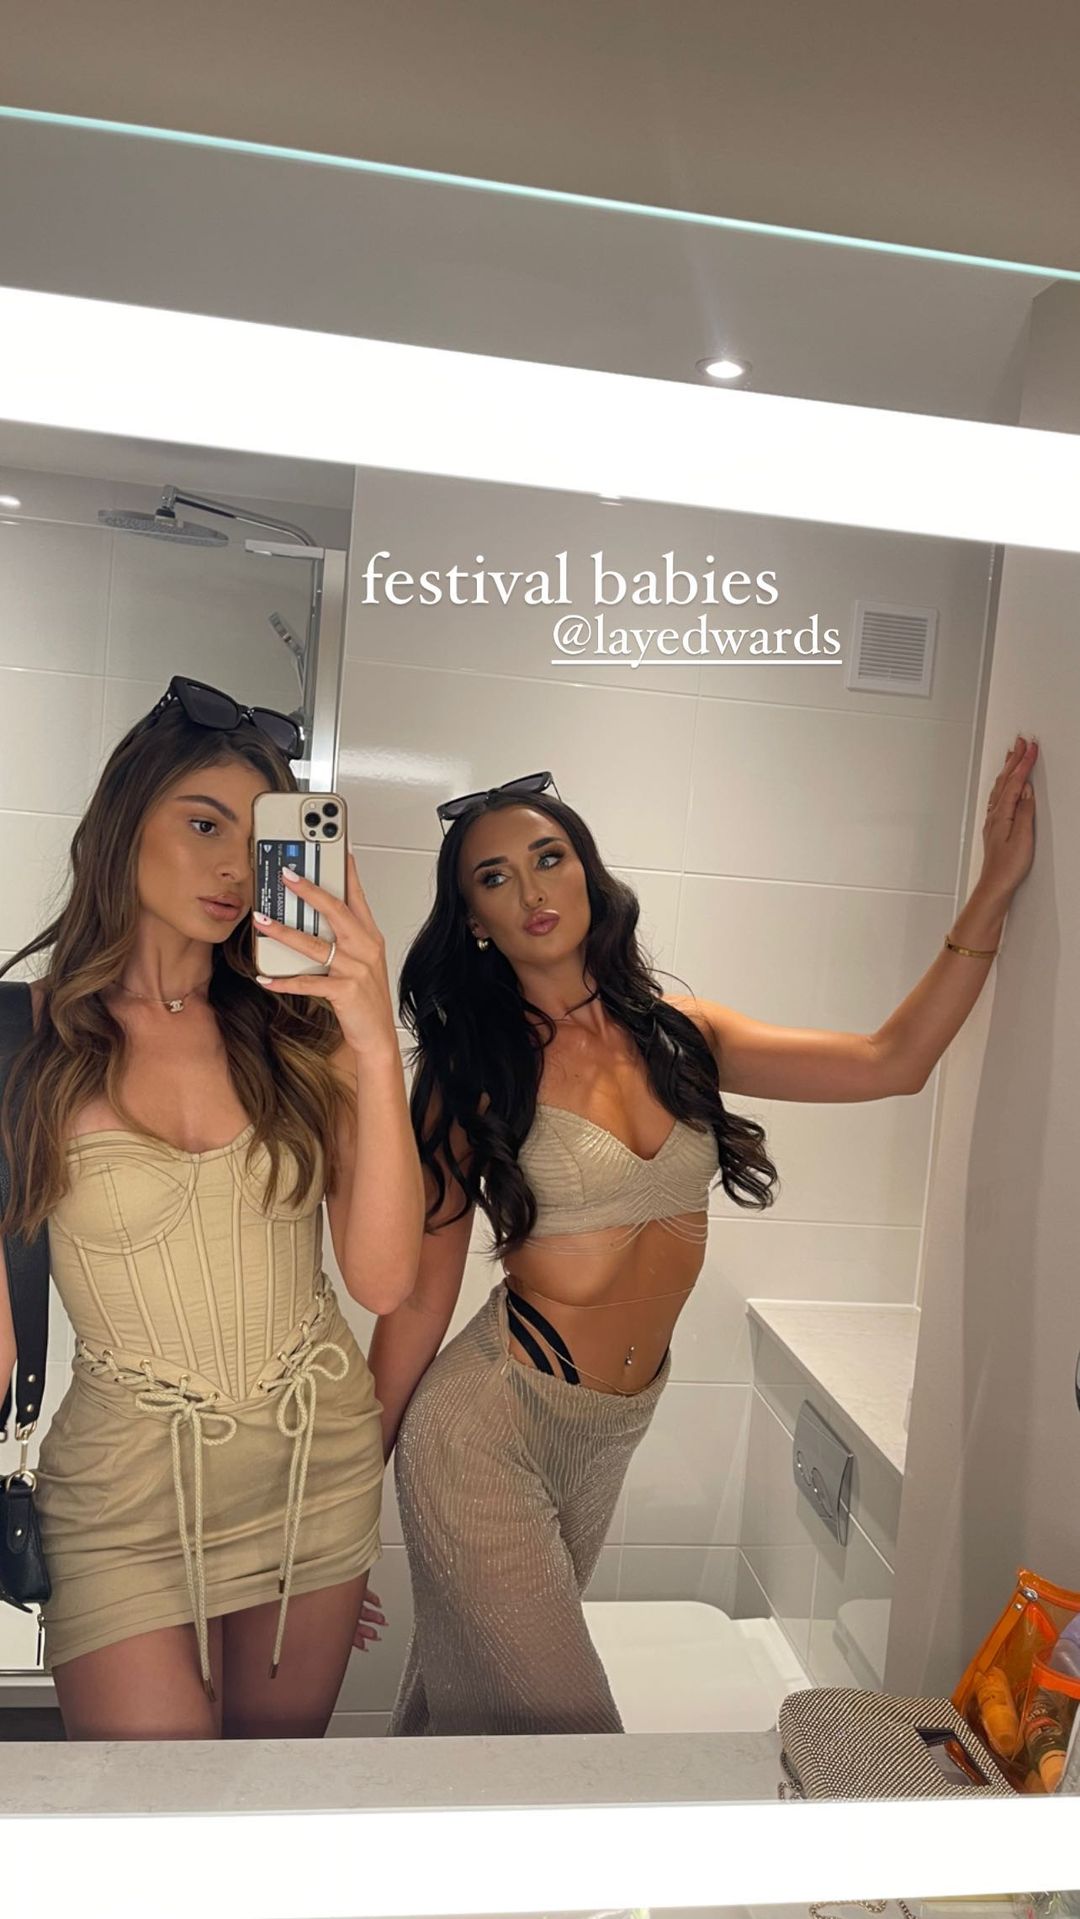 Inside Love Island stars’ boozy night out at festival as they reunite after villa